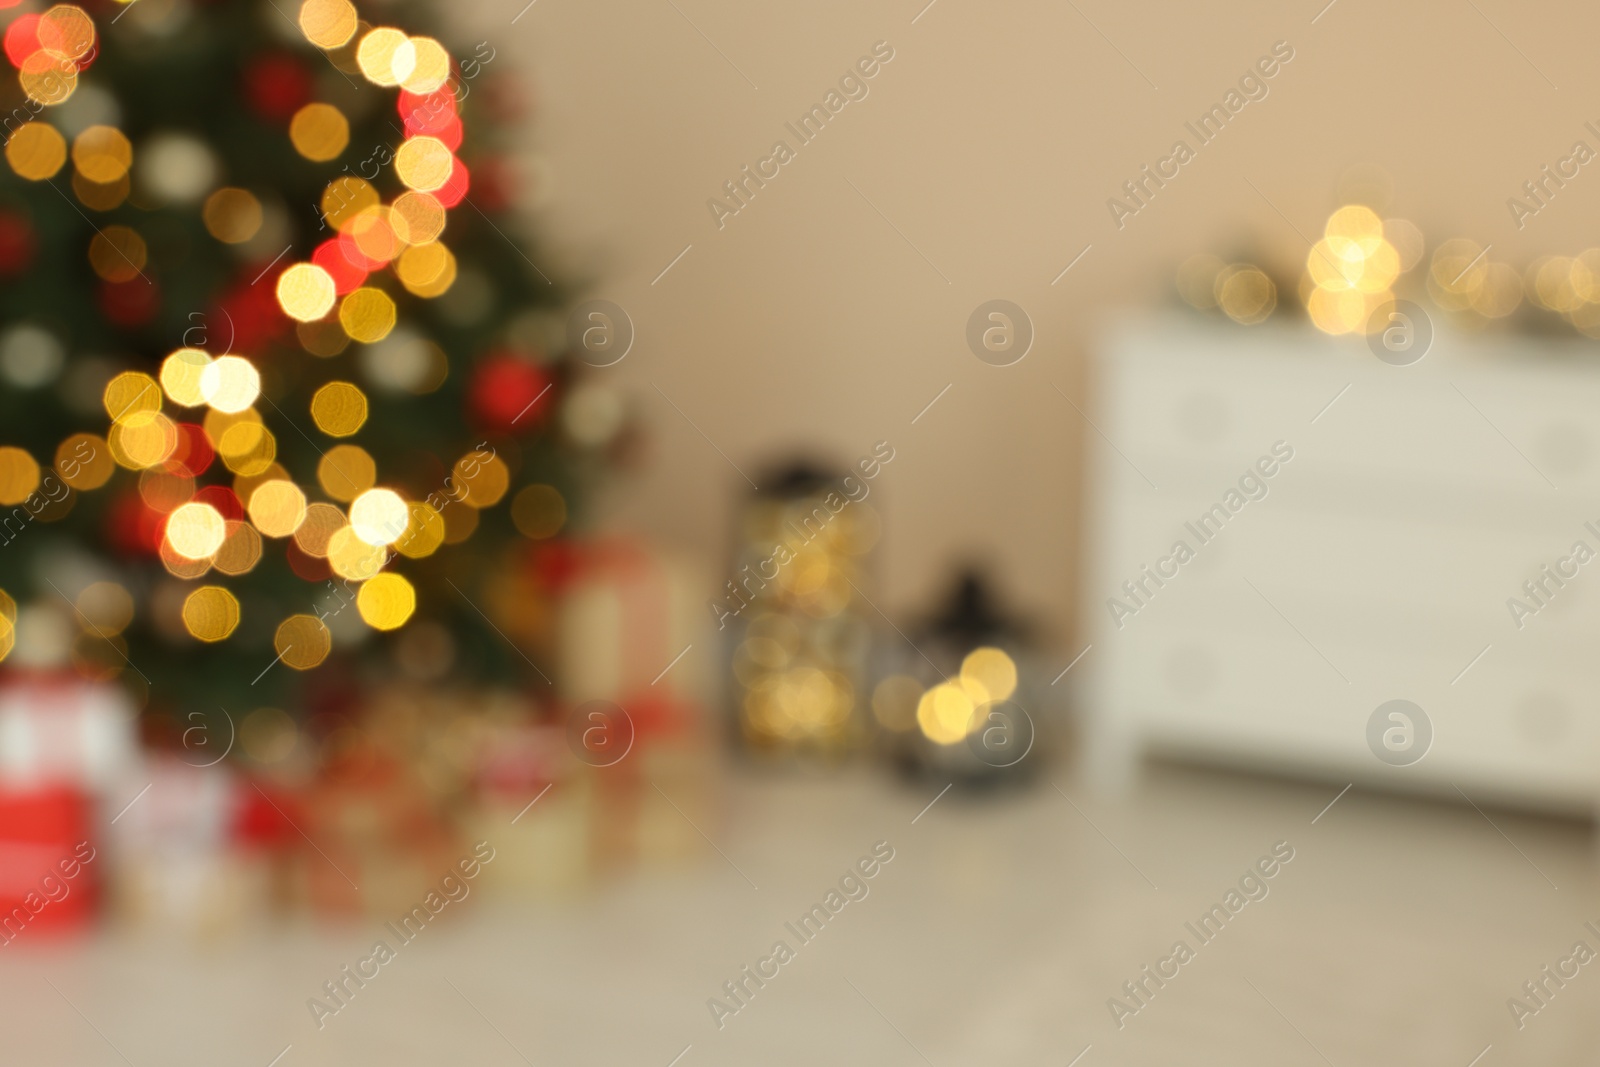 Photo of Beautiful tree decorated for Christmas and gift boxes indoors, blurred view. Interior design